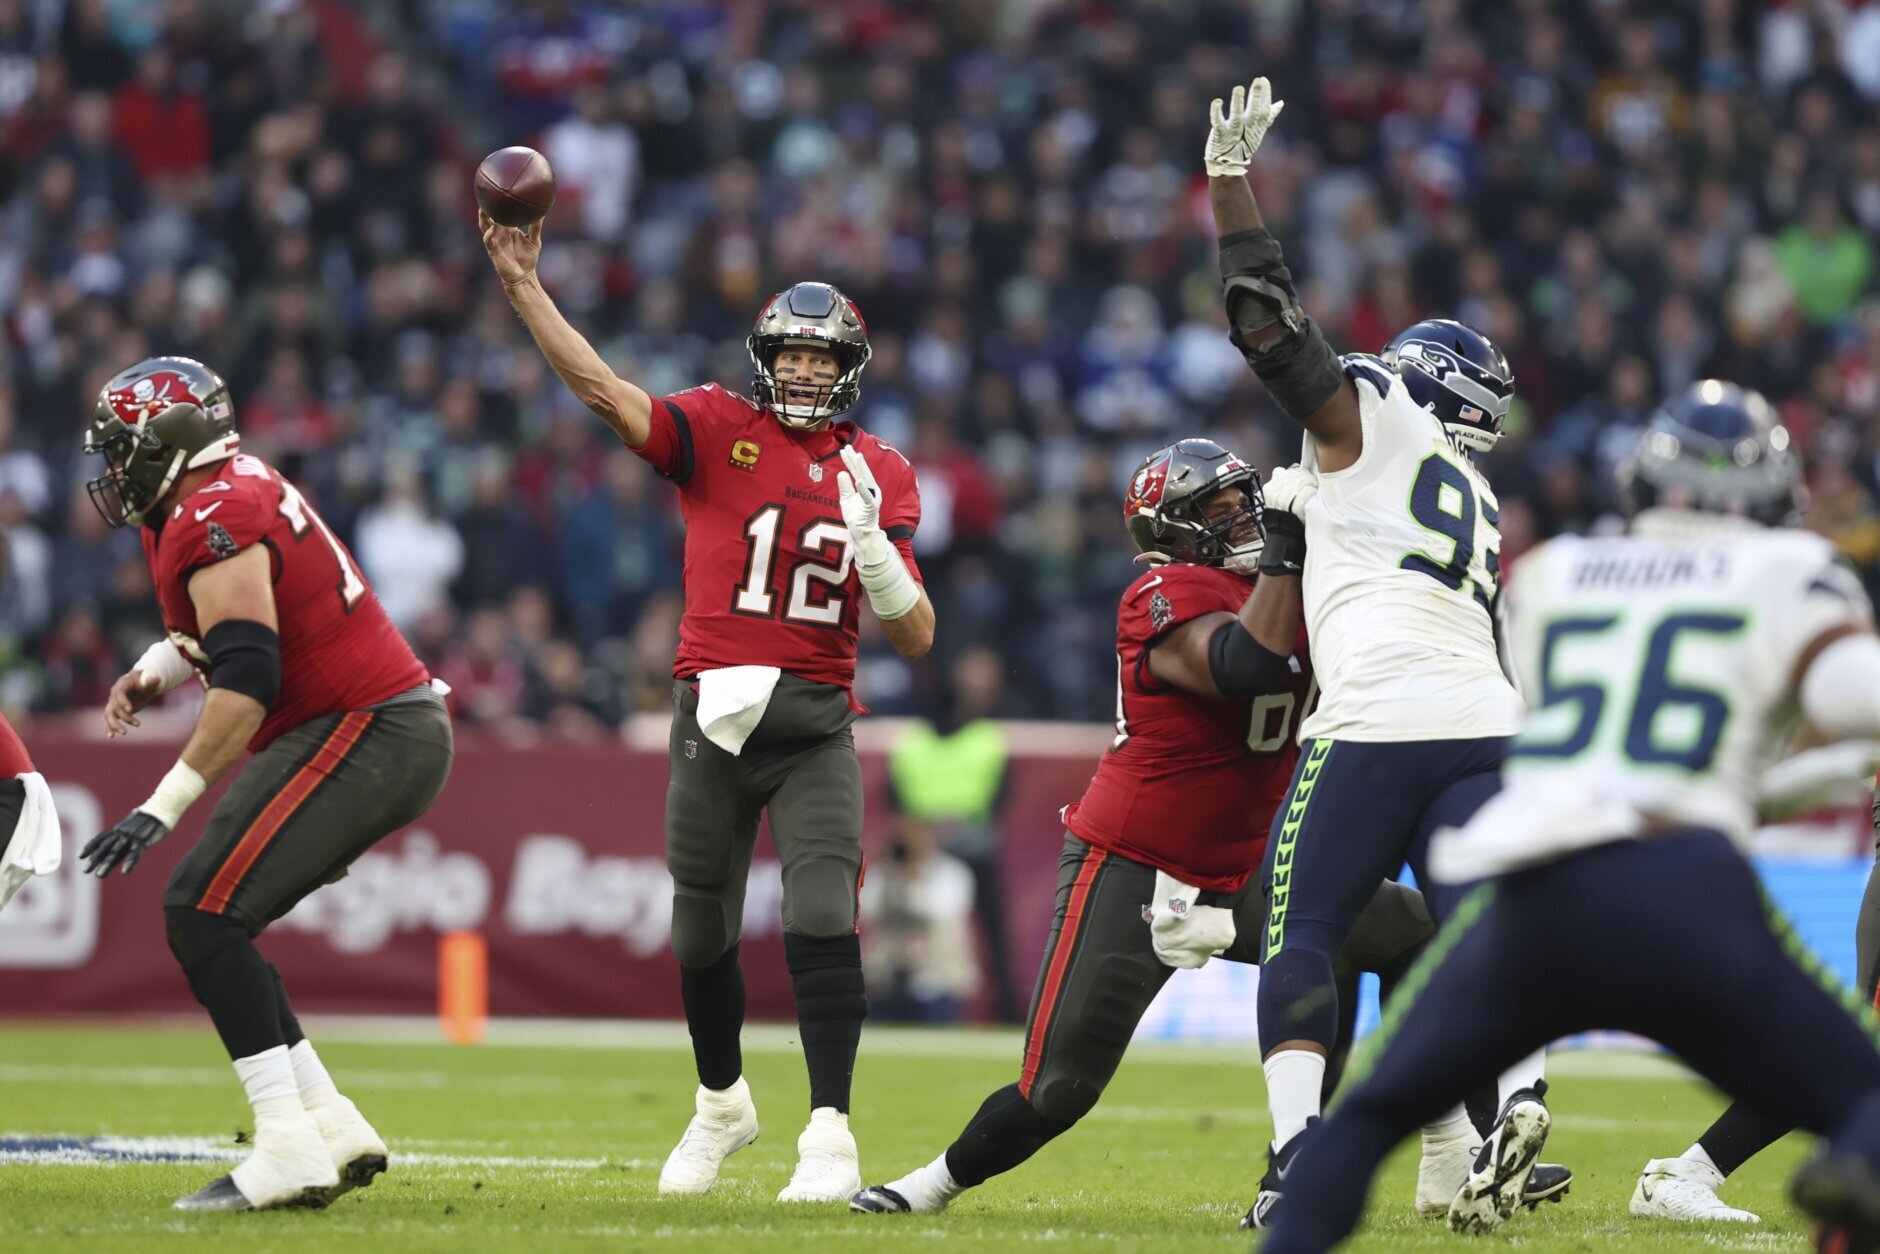 <p><em><strong>Seahawks 16</strong></em><br />
<em><strong>Bucs 21</strong></em></p>
<p>In Tom Brady&#8217;s never-ending quest to own EVERY record, <a href="https://twitter.com/ESPNStatsInfo/status/1591840021916848128?s=20&amp;t=uUmcjQOzbb6fpy94SWqA4w" target="_blank" rel="noopener">he missed out on the interception-less streak</a> but wins the first NFL game in Germany to become the first player to win in four different countries. This one may have saved Tampa&#8217;s season.</p>
